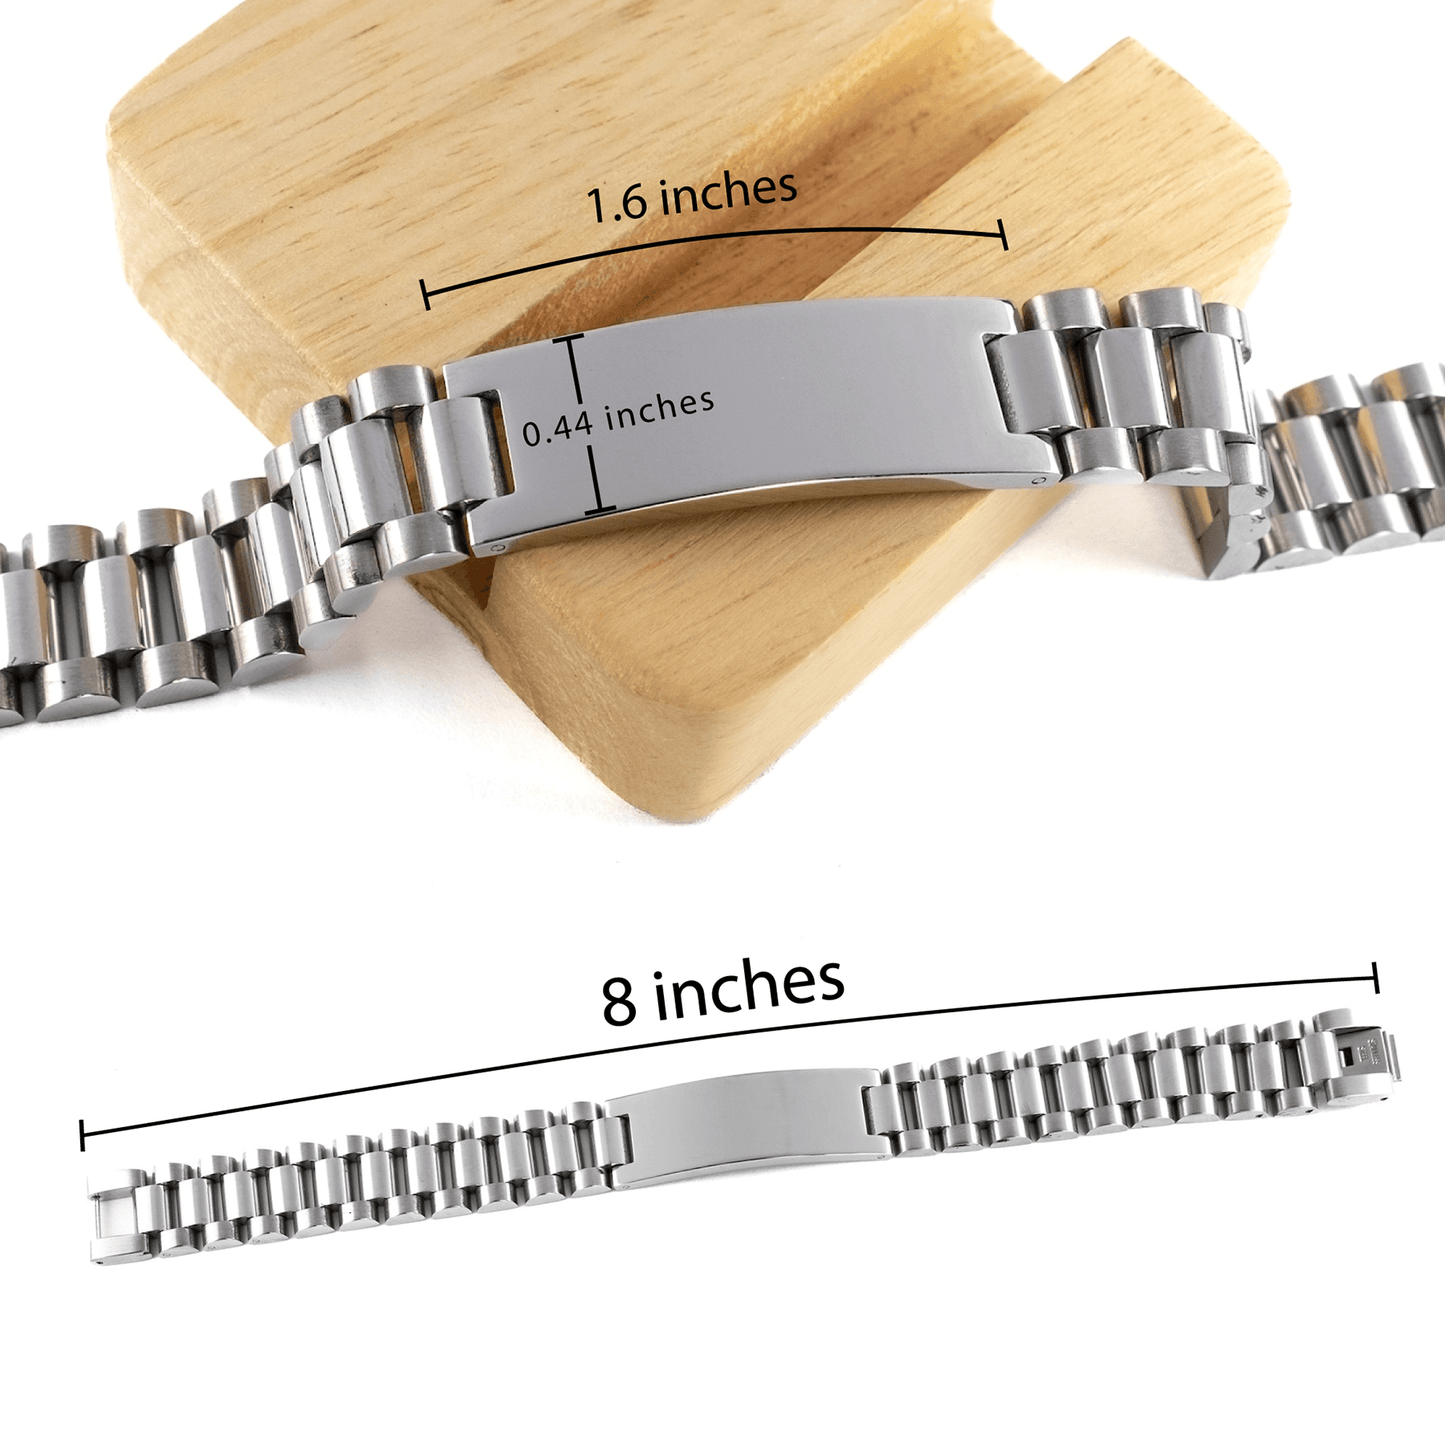 Orthodontist Ladder Stainless Steel Engraved Bracelet - Thanks for being who you are - Birthday Christmas Jewelry Gifts Coworkers Colleague Boss - Mallard Moon Gift Shop